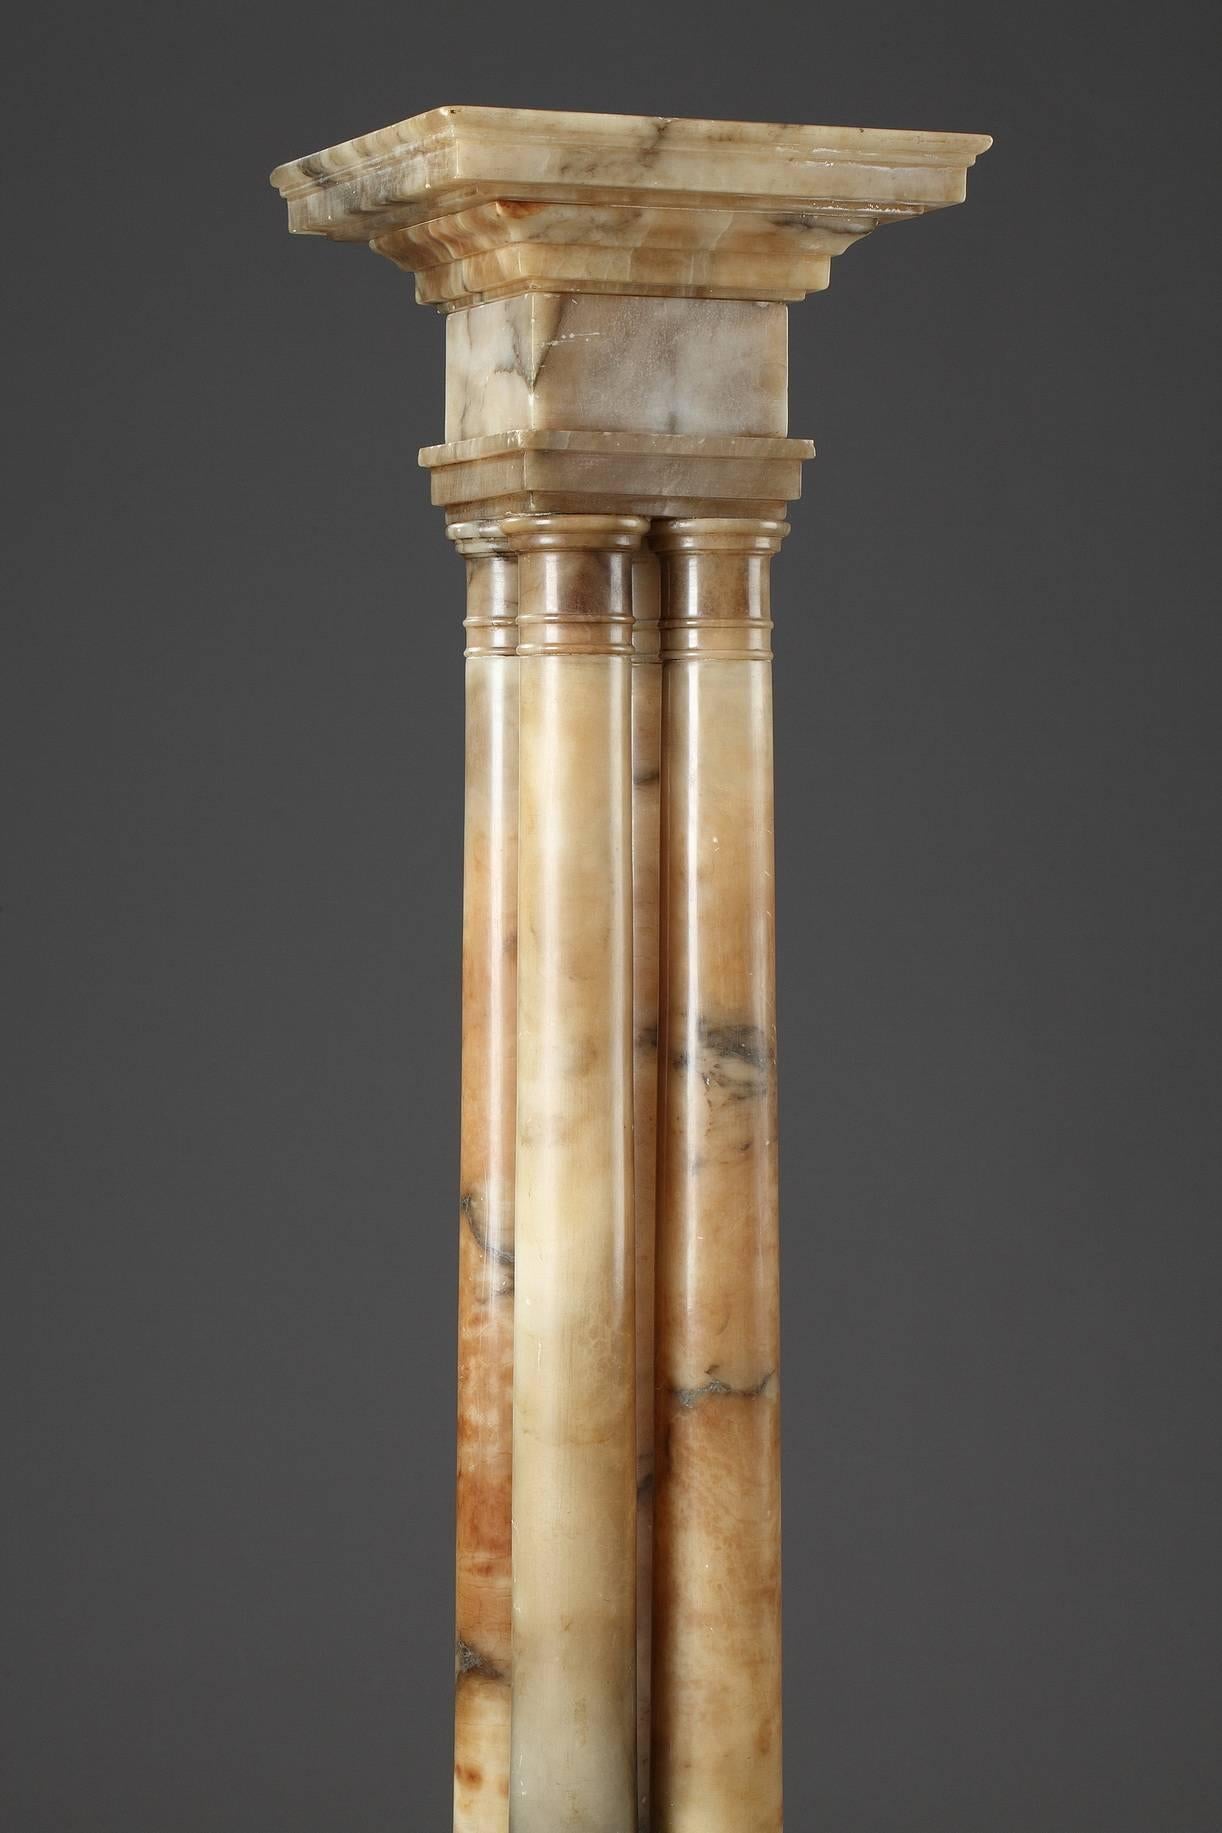 Display column in alabaster. The stem is composed of four columns decorated with Doric capitals and moulding bases. It is set on a high, square, terraced base, 19th century period. Good general condition, with light chips,

circa 1860
Dimension: